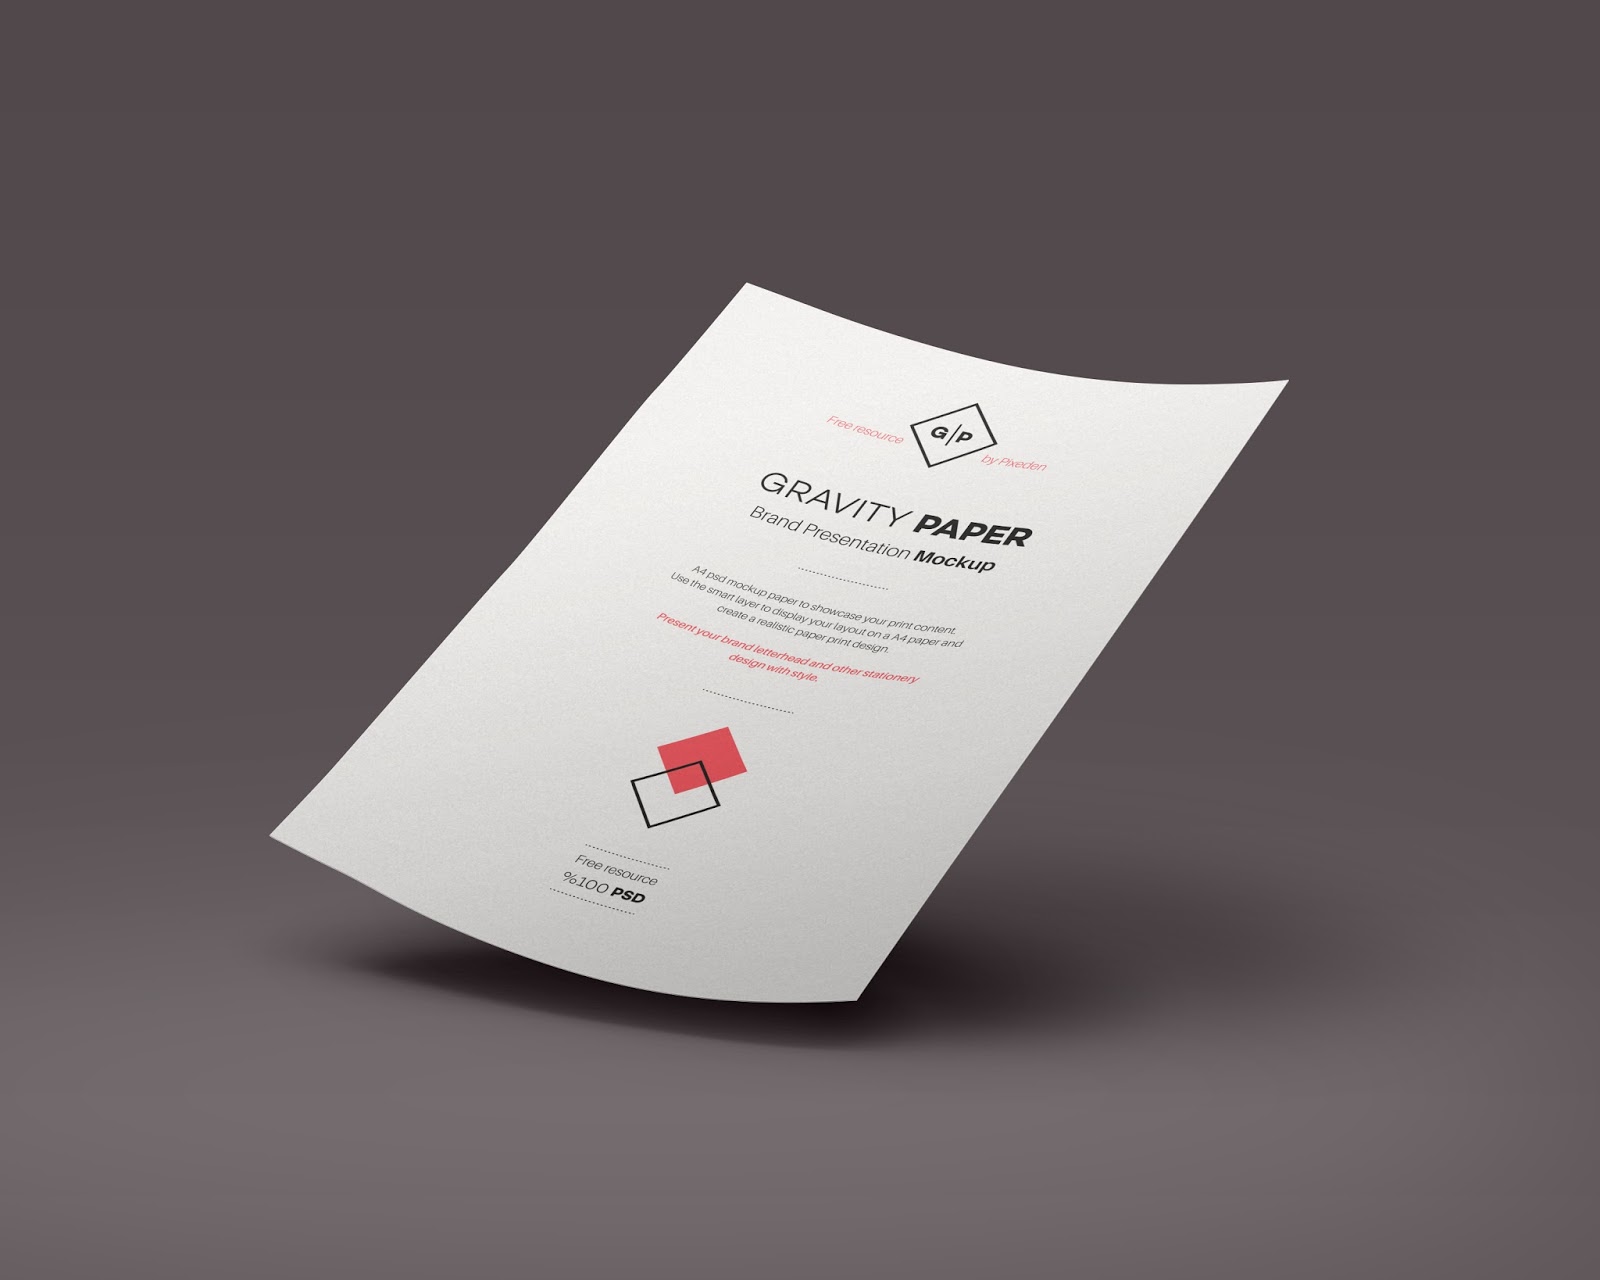 Download 10 High Quality Free Photoshop PSD A4 Flyer/Poster Mockups ...